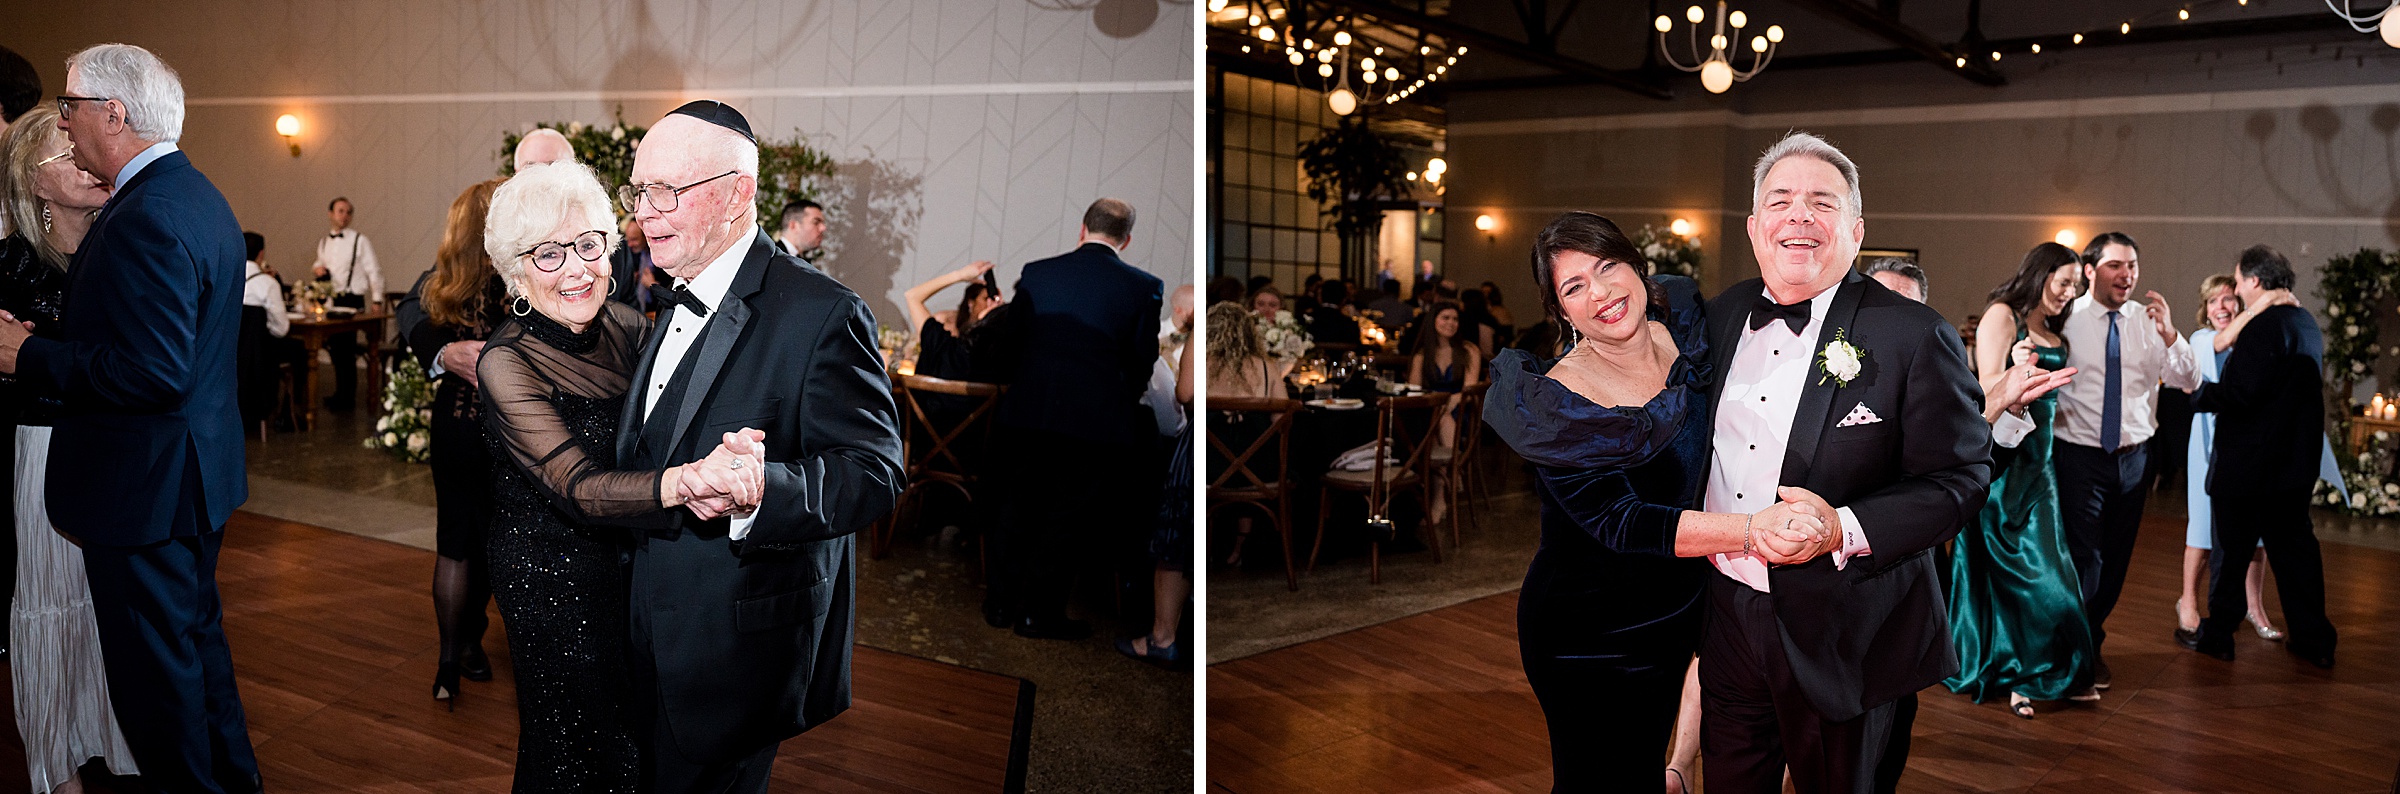 Two images capturing people dancing at a Lilah Events wedding reception.